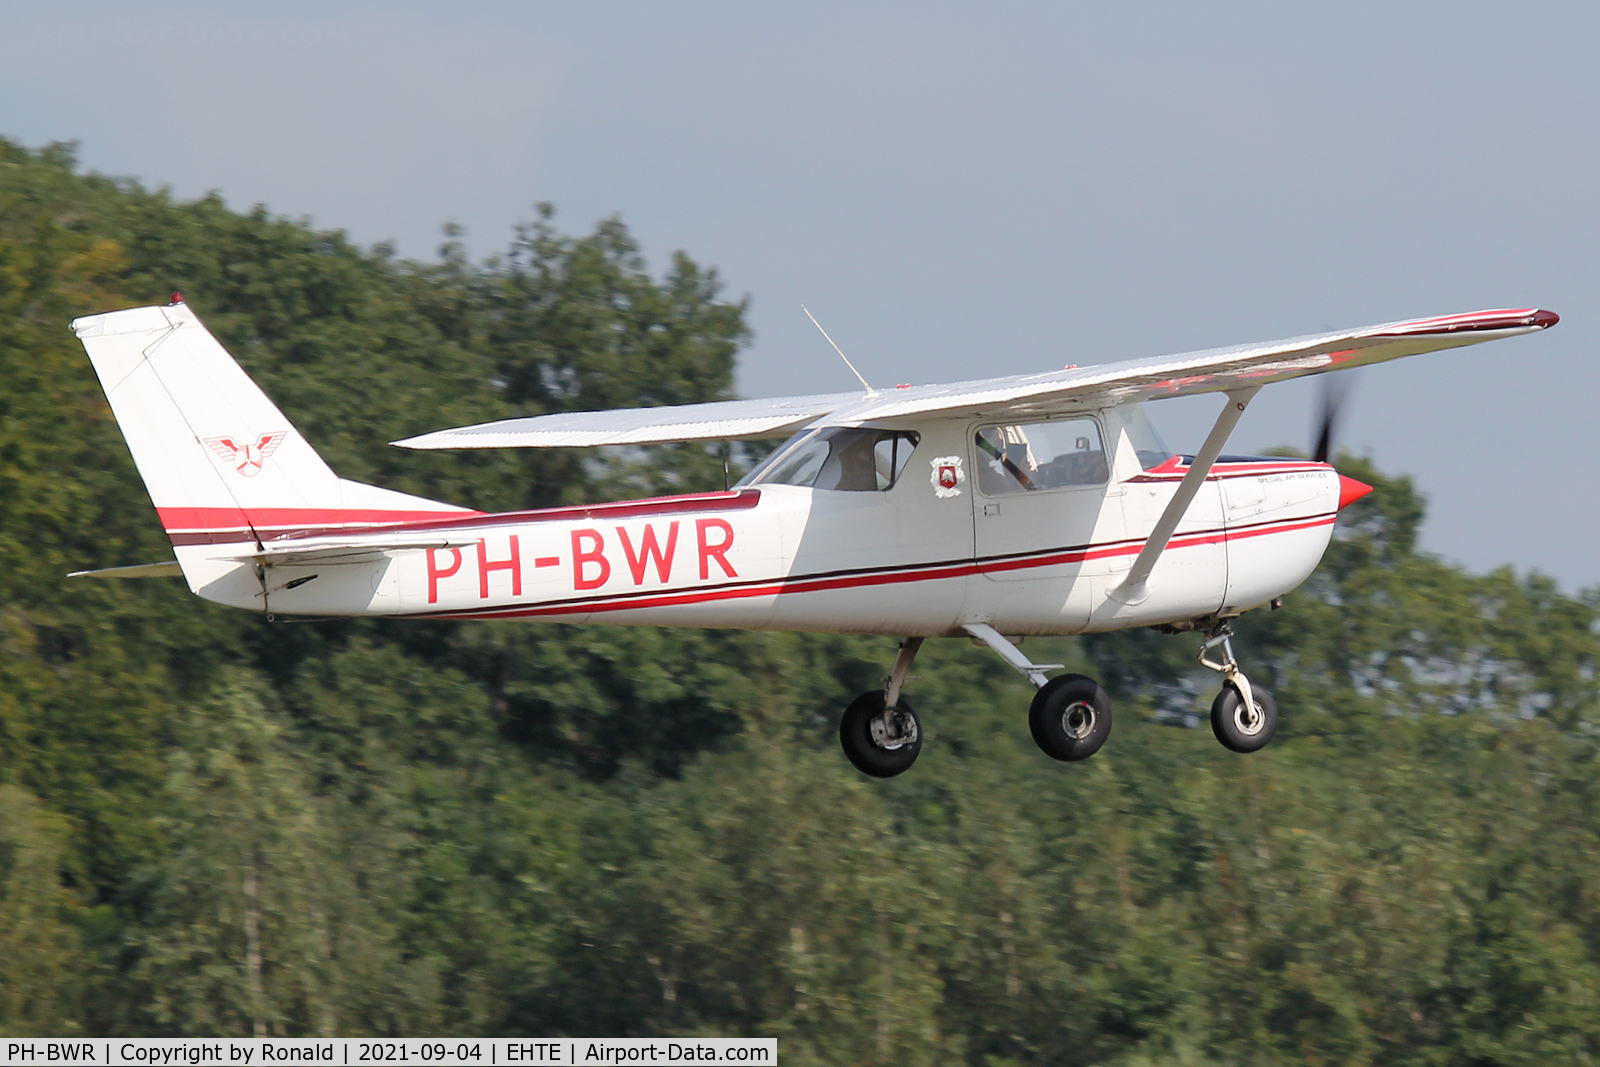 PH-BWR, 1968 Reims F150H C/N 0365, at teuge